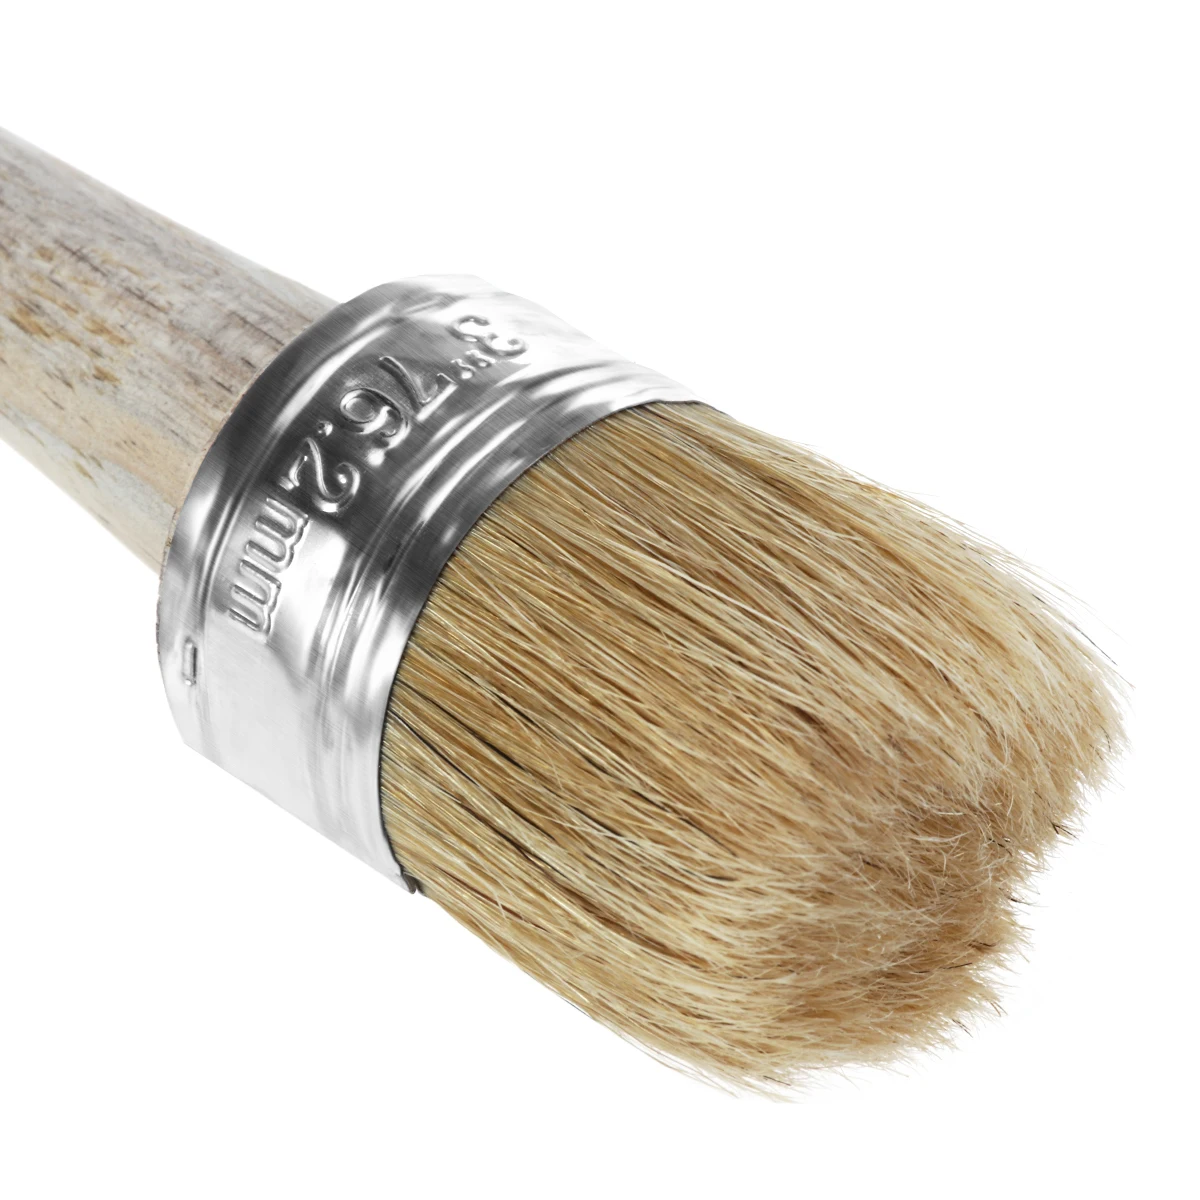 Chalk Paint Wax Brush for Painting or Waxing Furniture Stencils Folkart Home Decor Wood Large Brushes with Natural Bristles